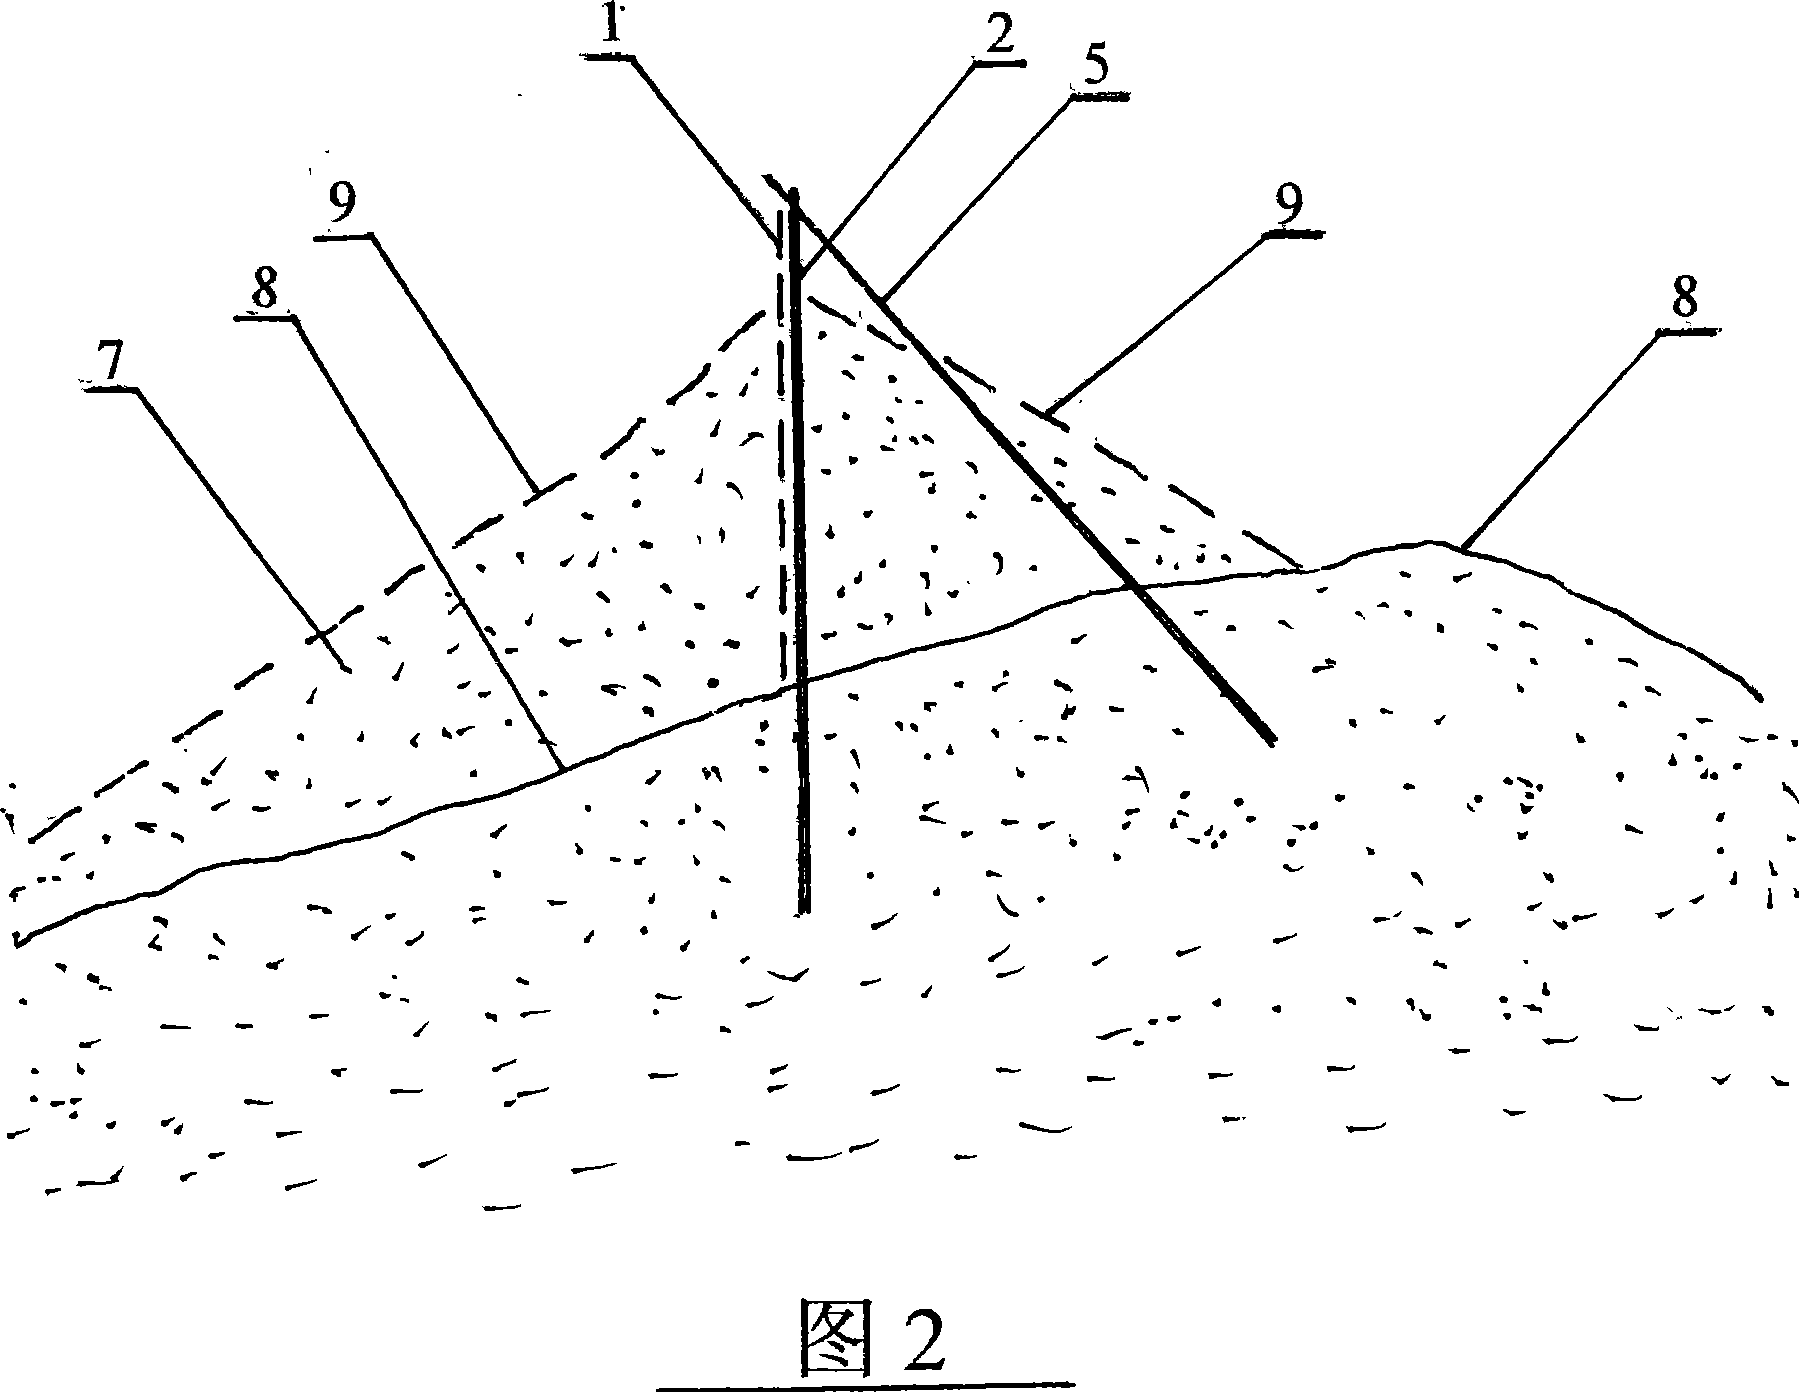 Serial-connected sand-trapping net and sediment storage dam built with the same